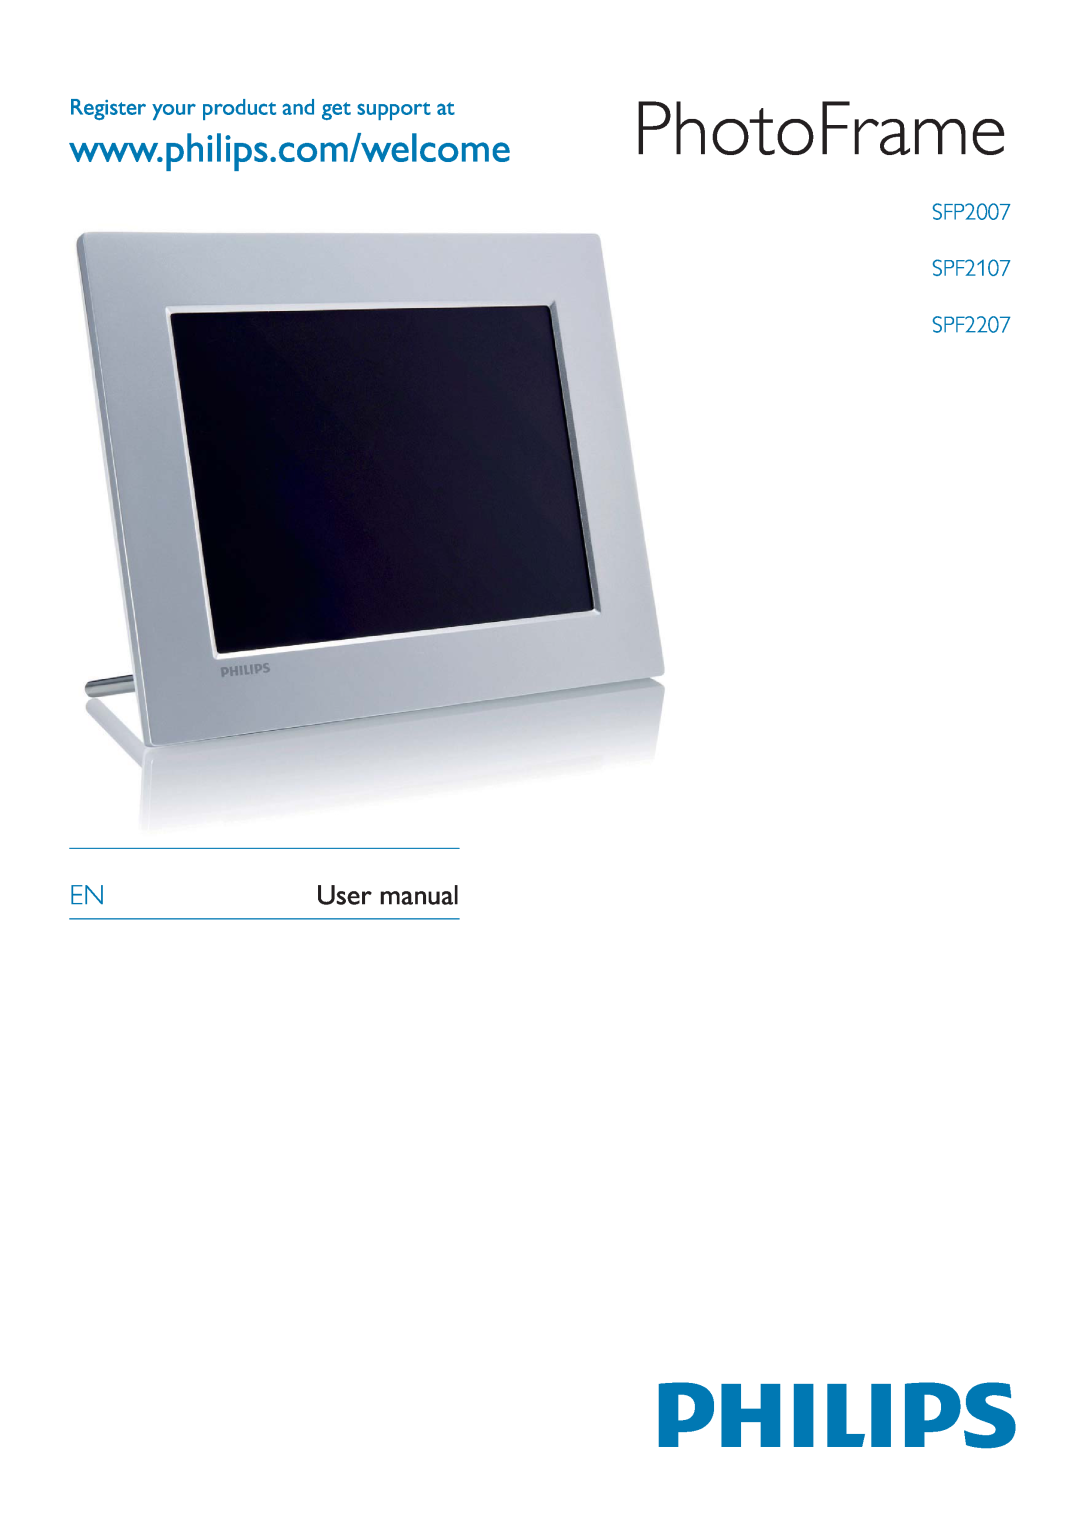 Philips user manual PhotoFrame, Register your product and get support at, SFP2007 SPF2107 SPF2207 